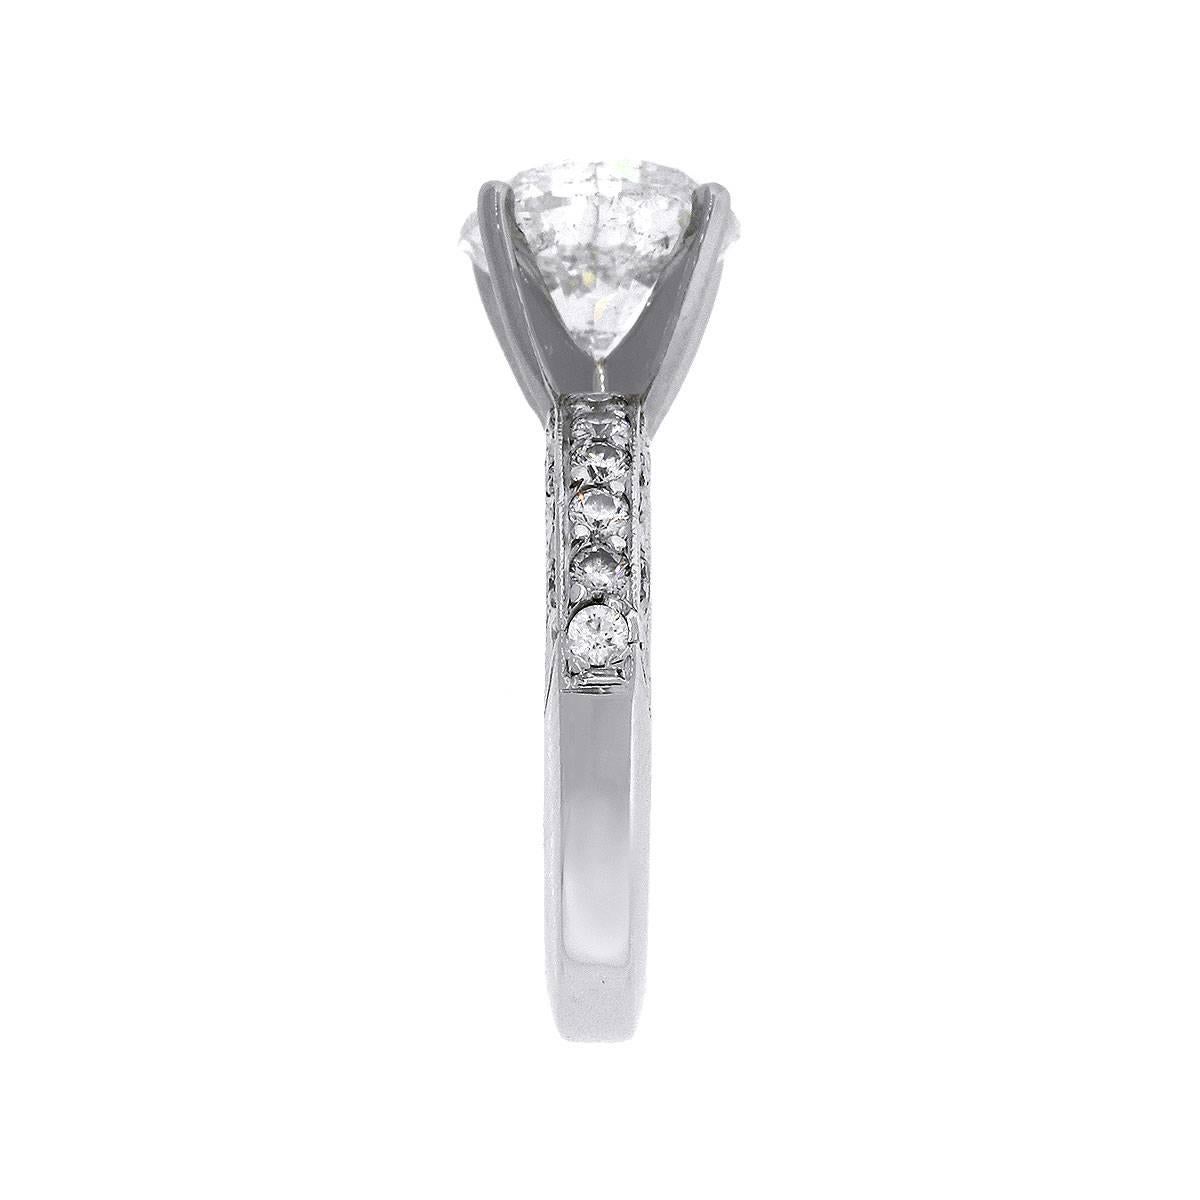 Material: Platinum
Diamond Details: Approximately 3.66ct round brilliant diamond. G/H in color and I1 in clarity
Side Diamond Details: Approximately 0.35ctw of round diamonds in Tacori setting. F in color VS in clarity.
Size: 6
Total Weight: 8.7g